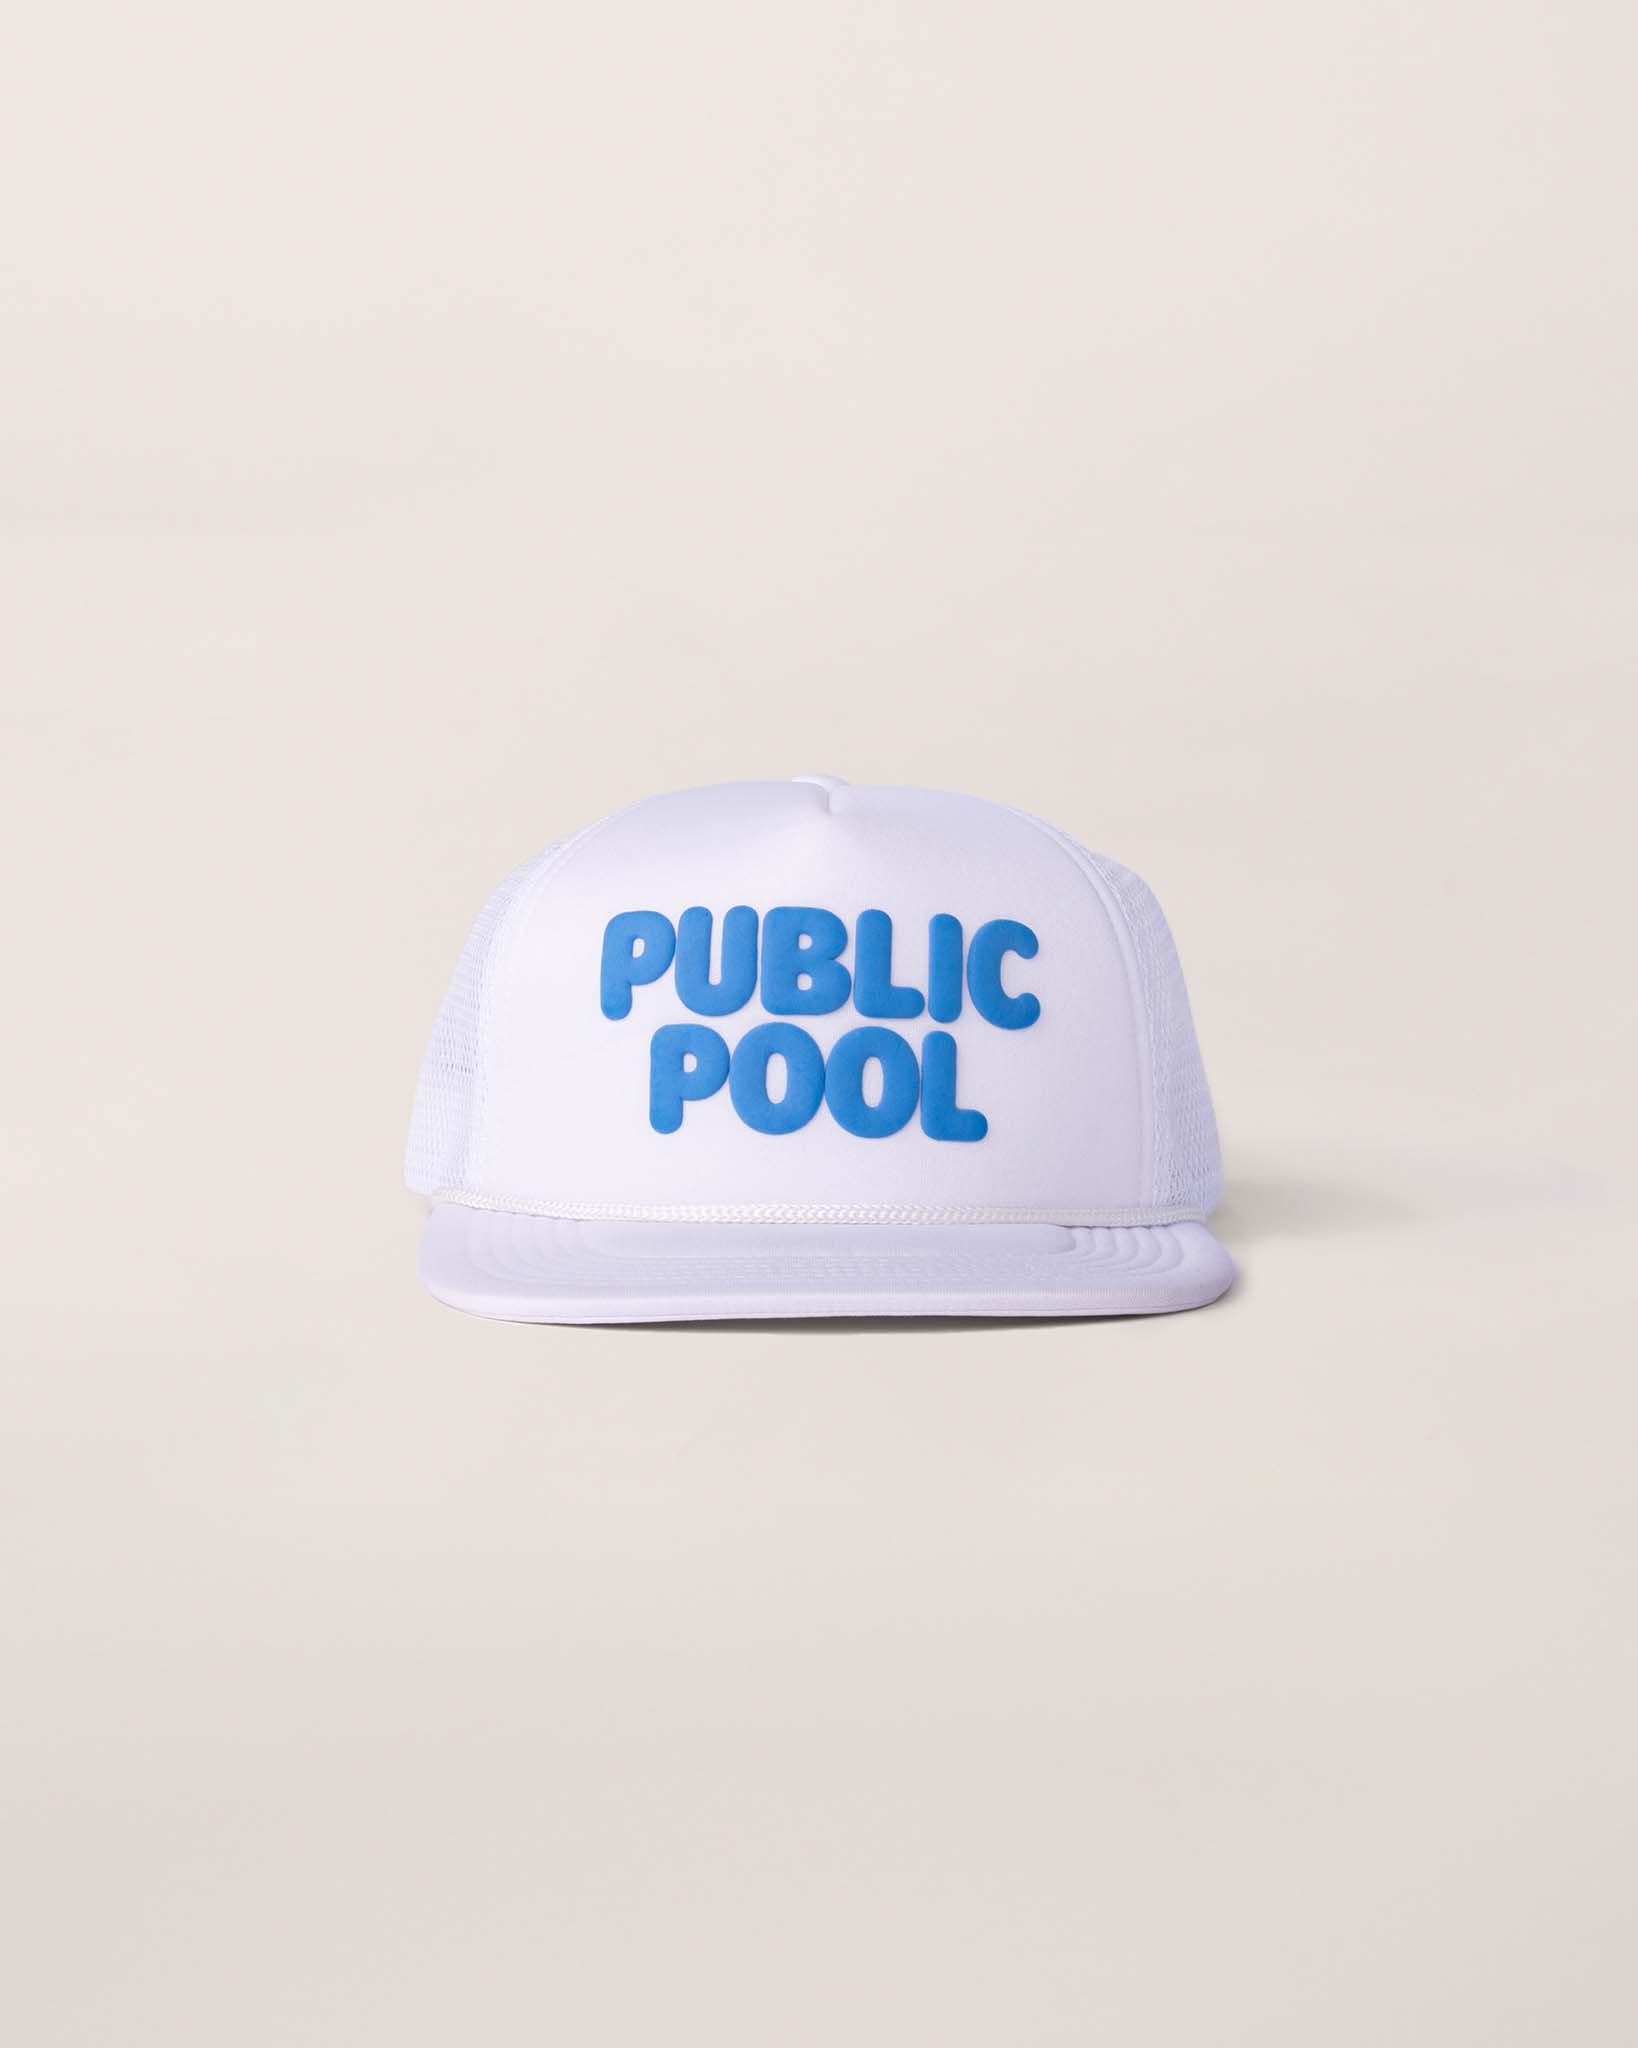 A white trucker hat with an blue Public Pool logo. 